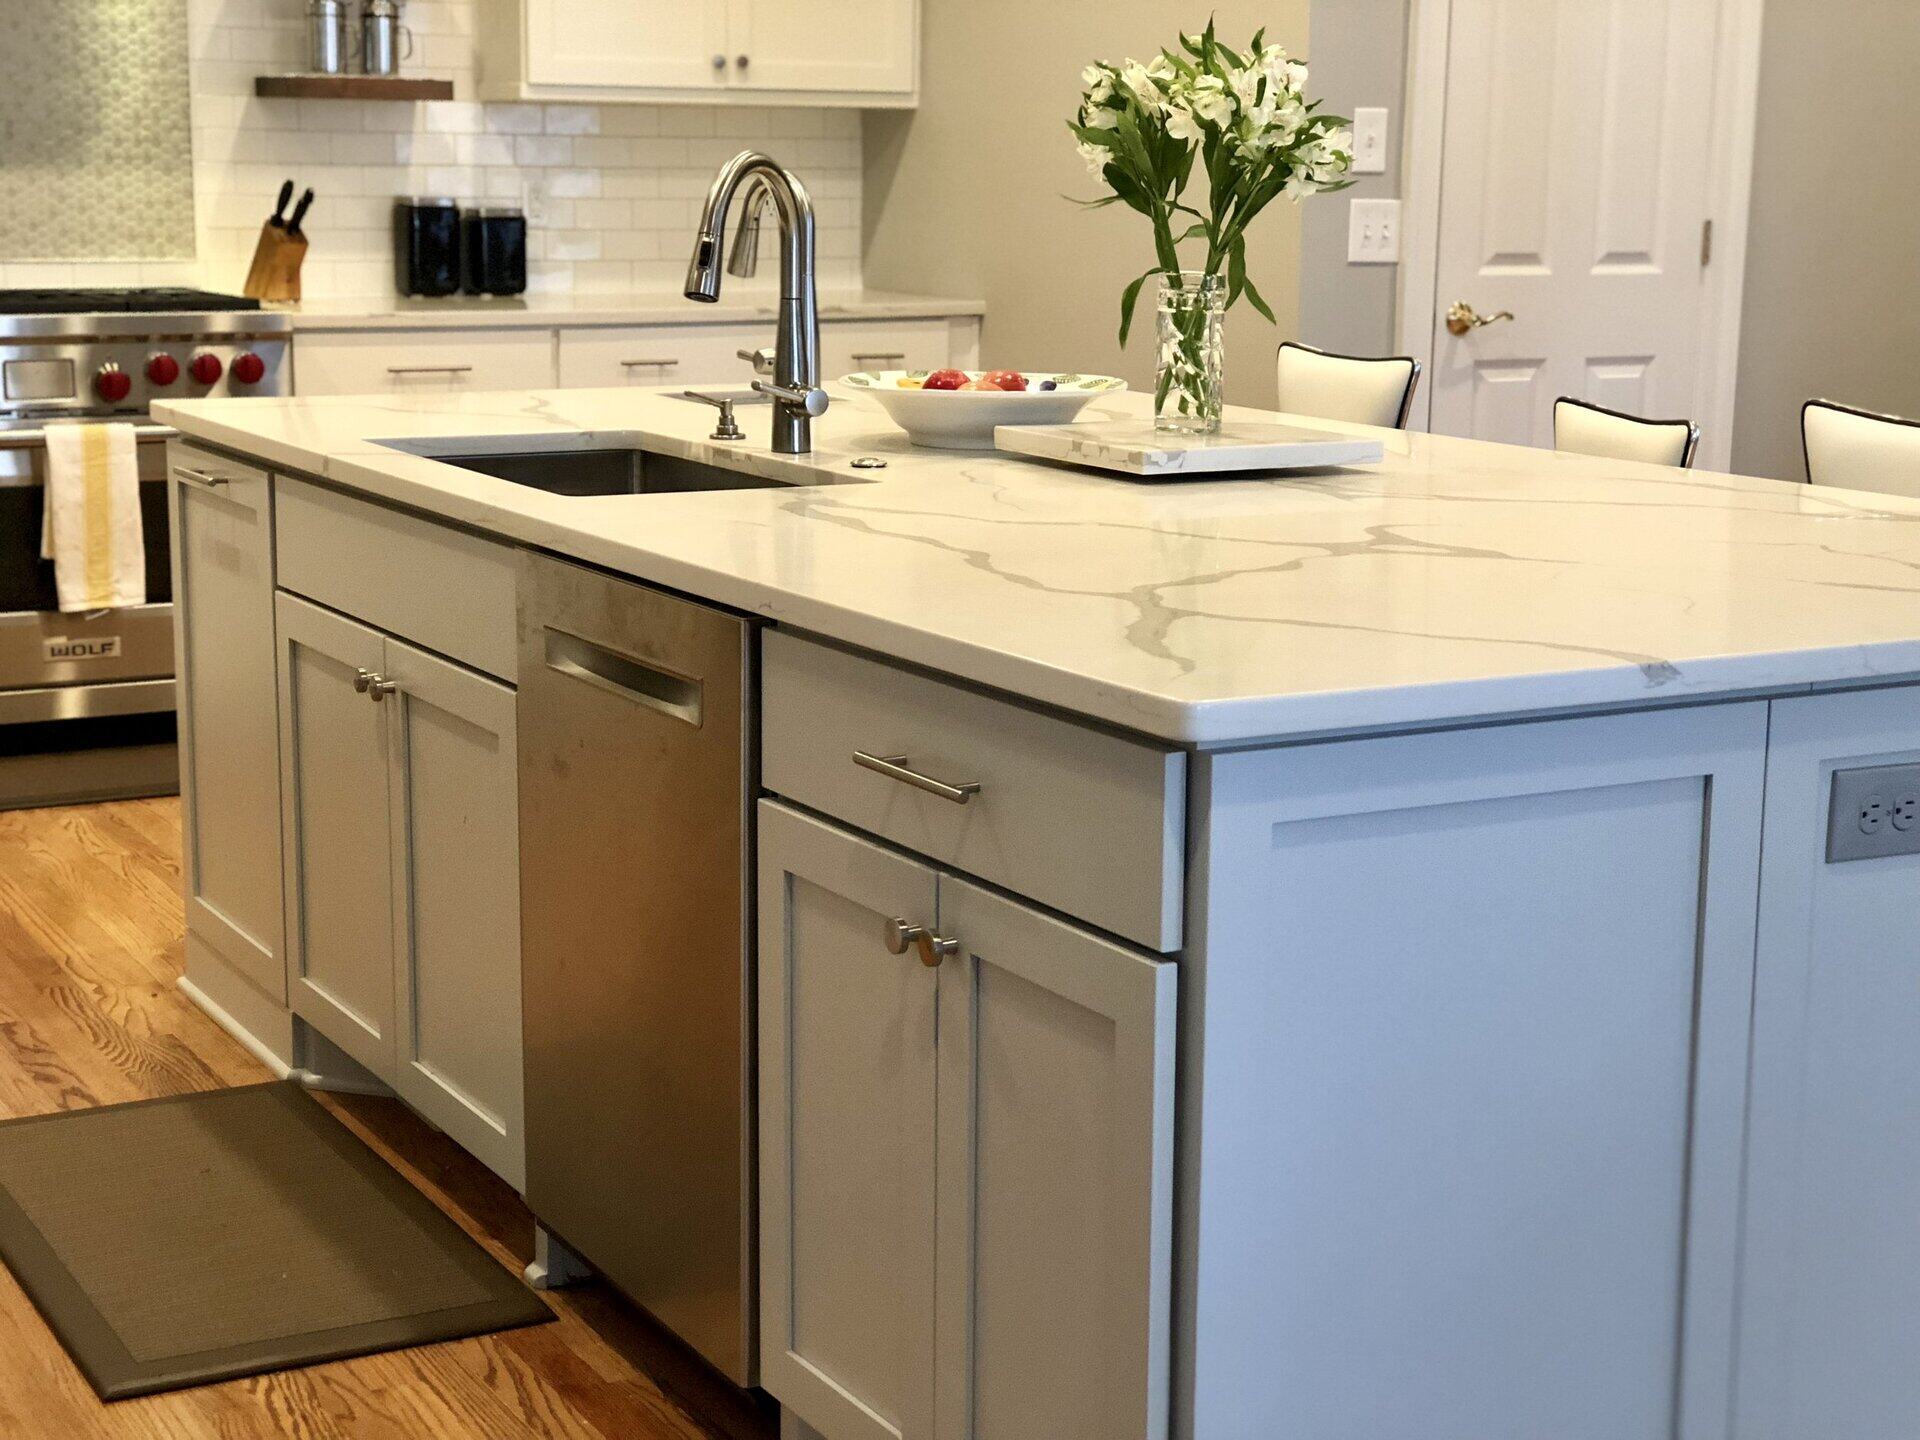 Where To Kitchen Island With Sink